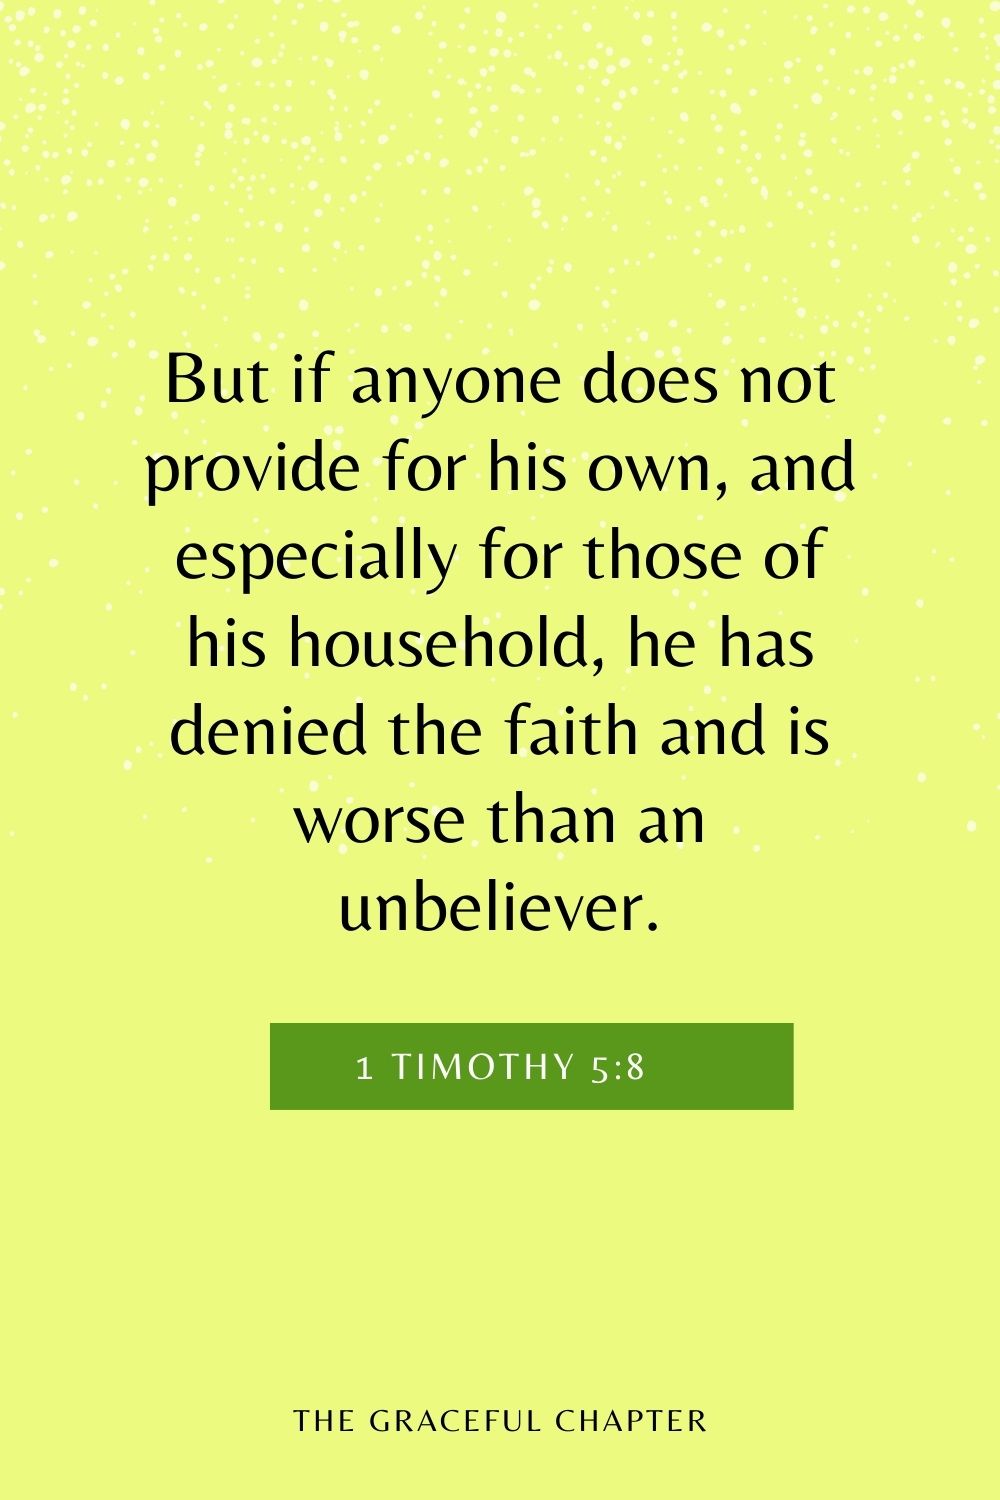 But if anyone does not provide for his own, and especially for those of his household, he has denied the faith and is worse than an unbeliever. 1 Timothy 5:8